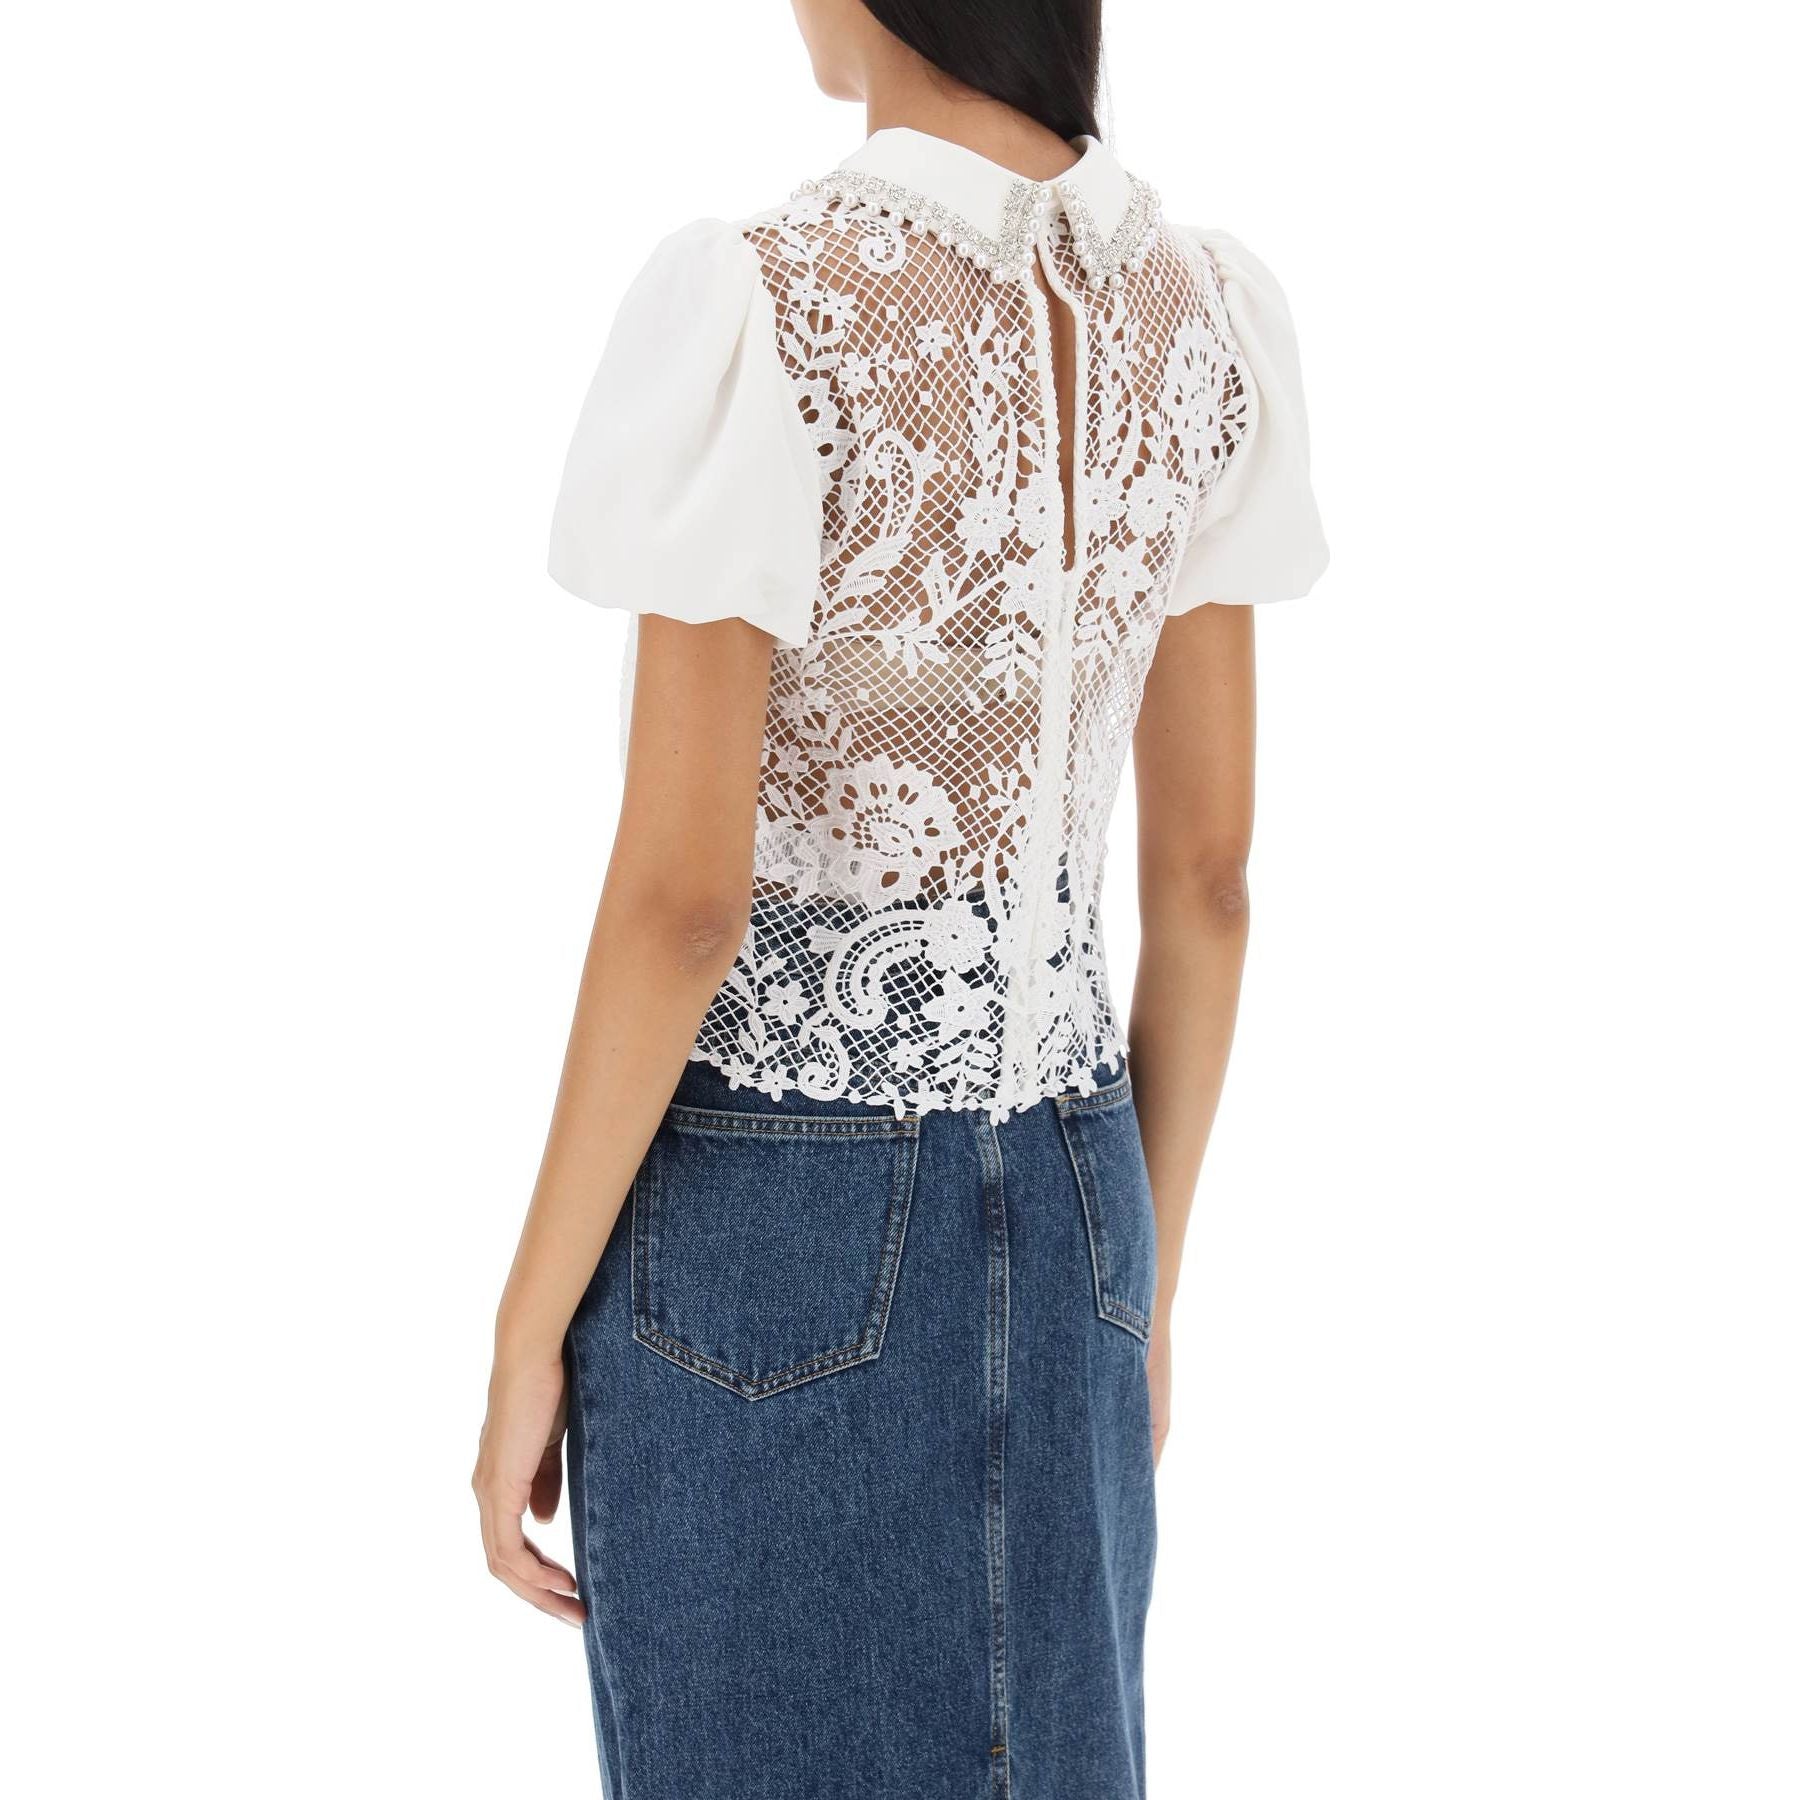 Floral Lace Top With Appliques